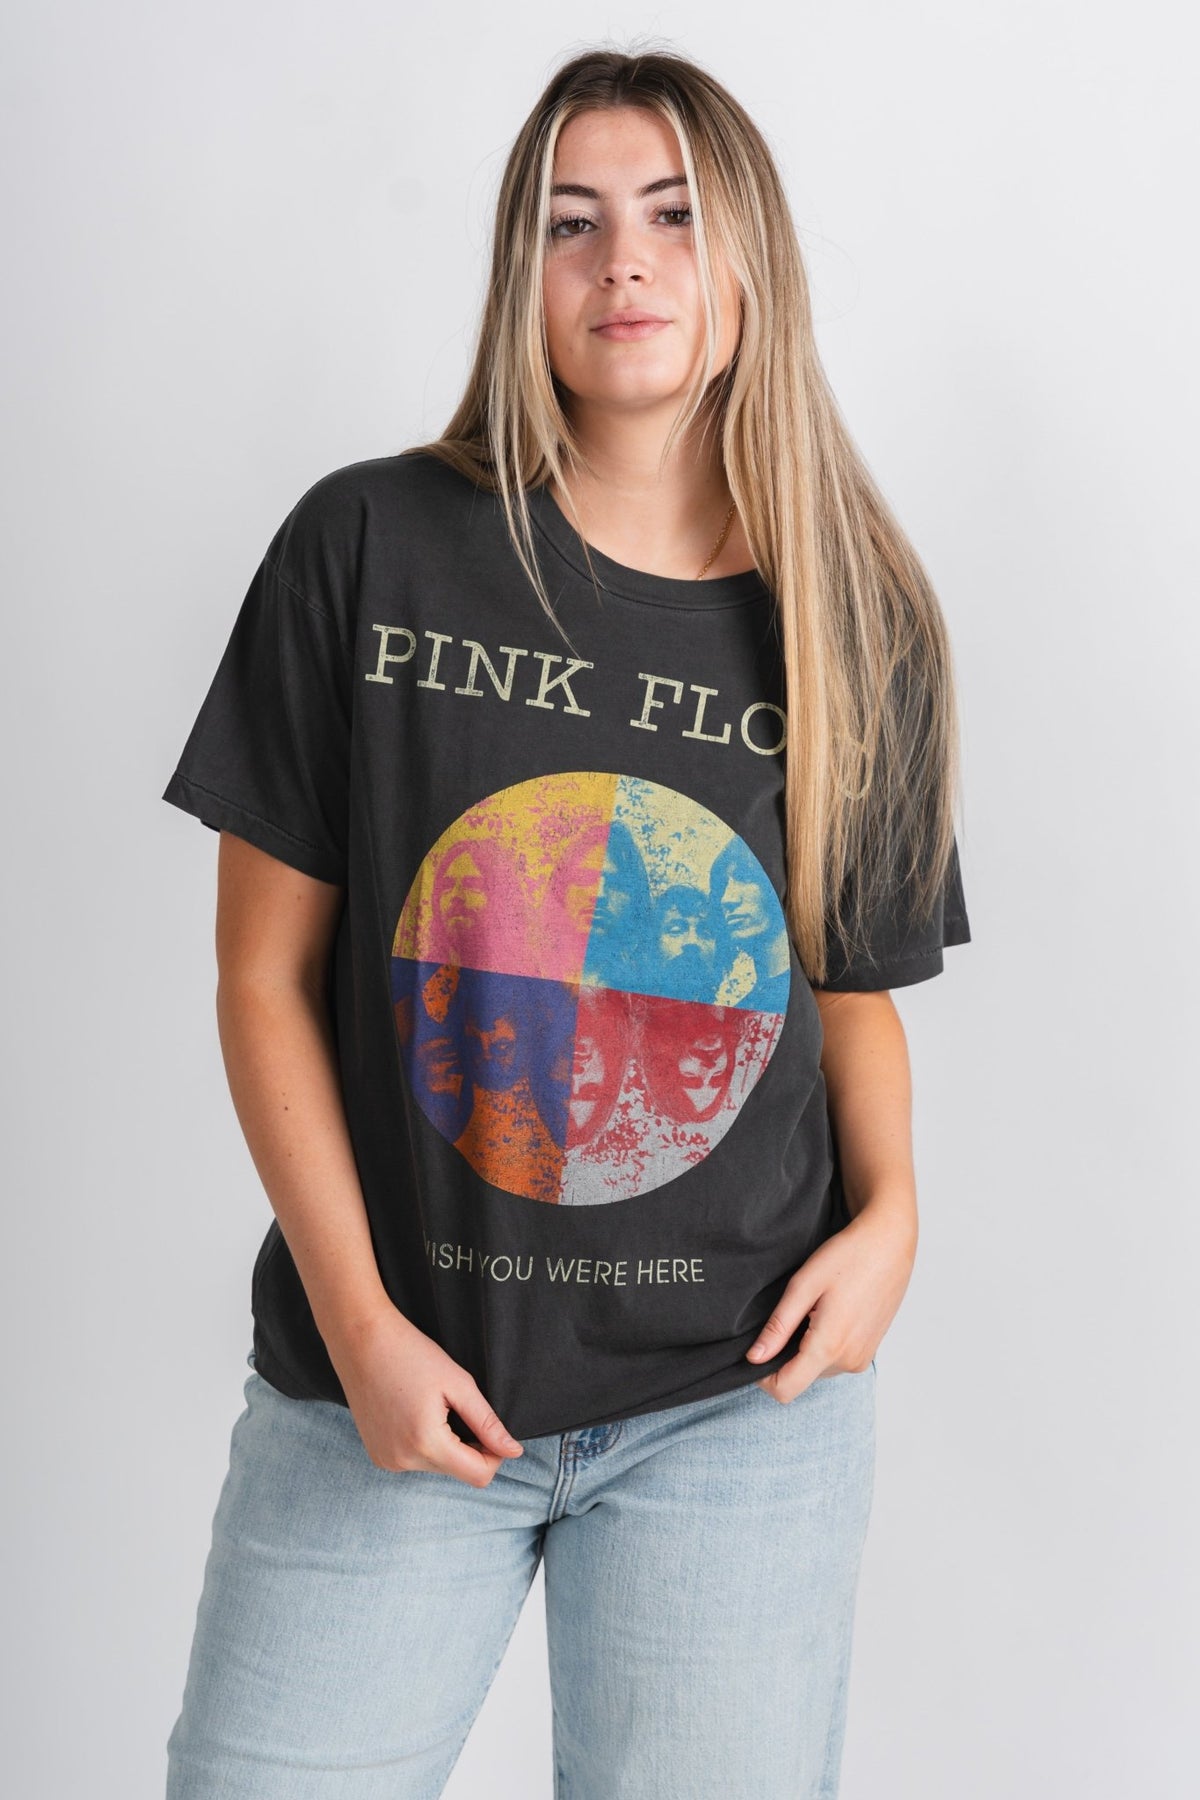 DayDreamer Pink Floyd wish you were here t-shirt pigment black - Trendy Band T-Shirts and Sweatshirts at Lush Fashion Lounge Boutique in Oklahoma City